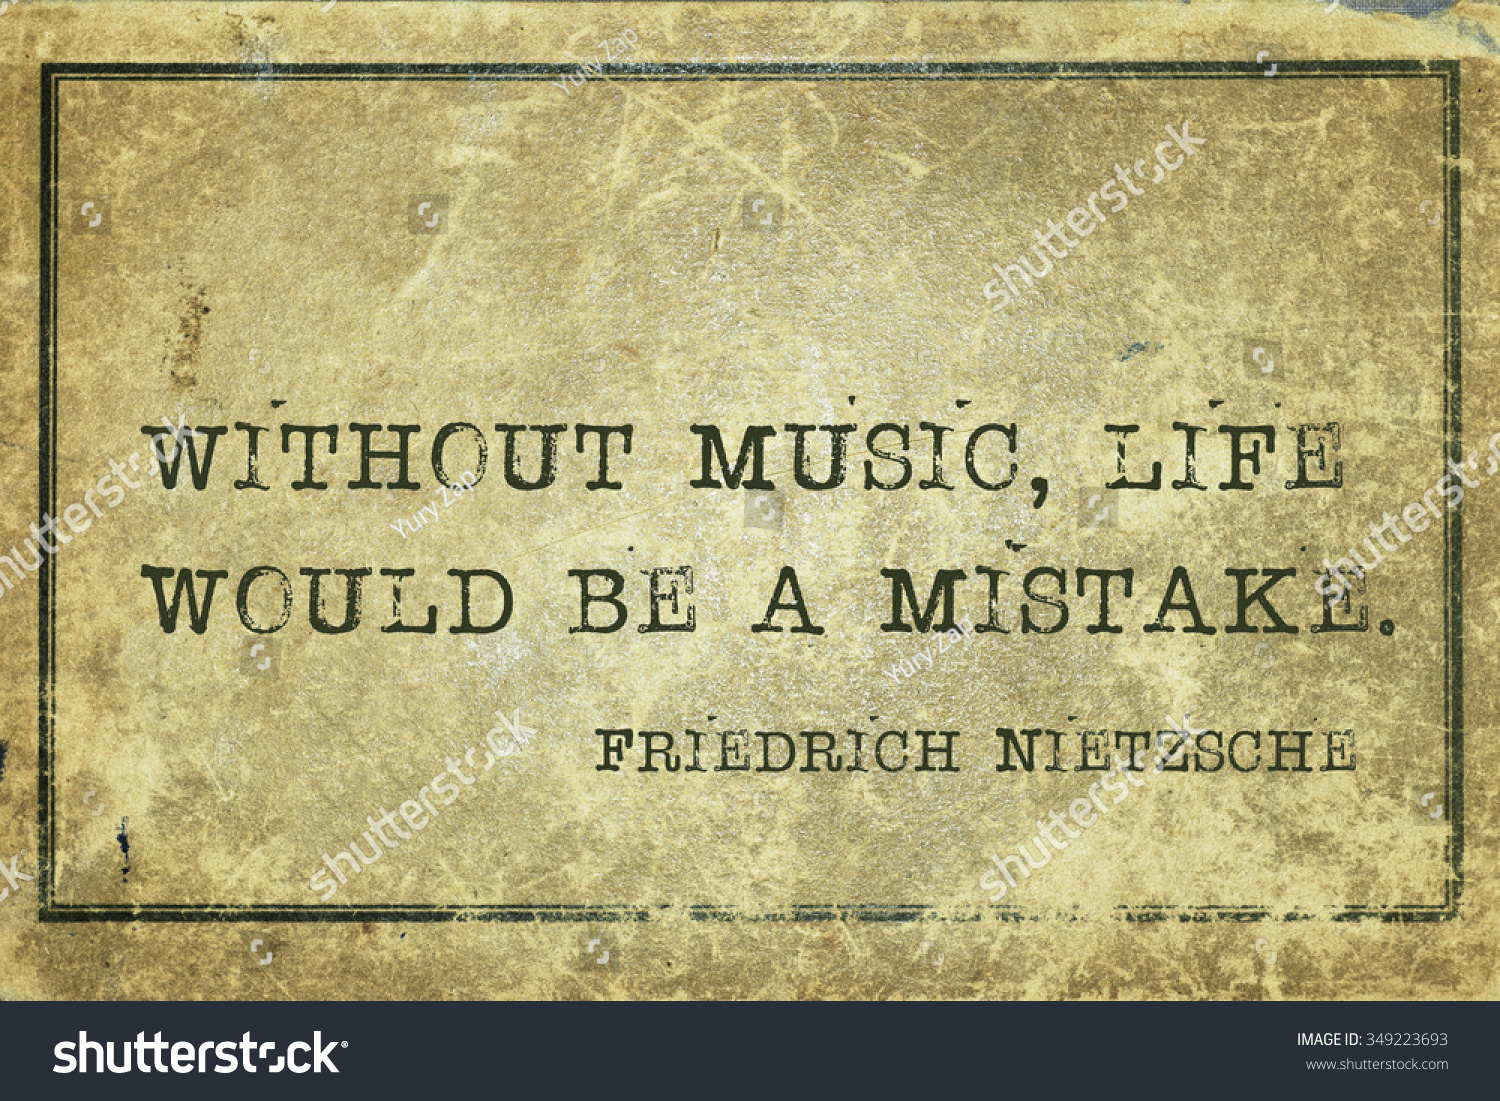 Without music life would be a mistake ancient German philosopher Friedrich Nietzsche quote printed